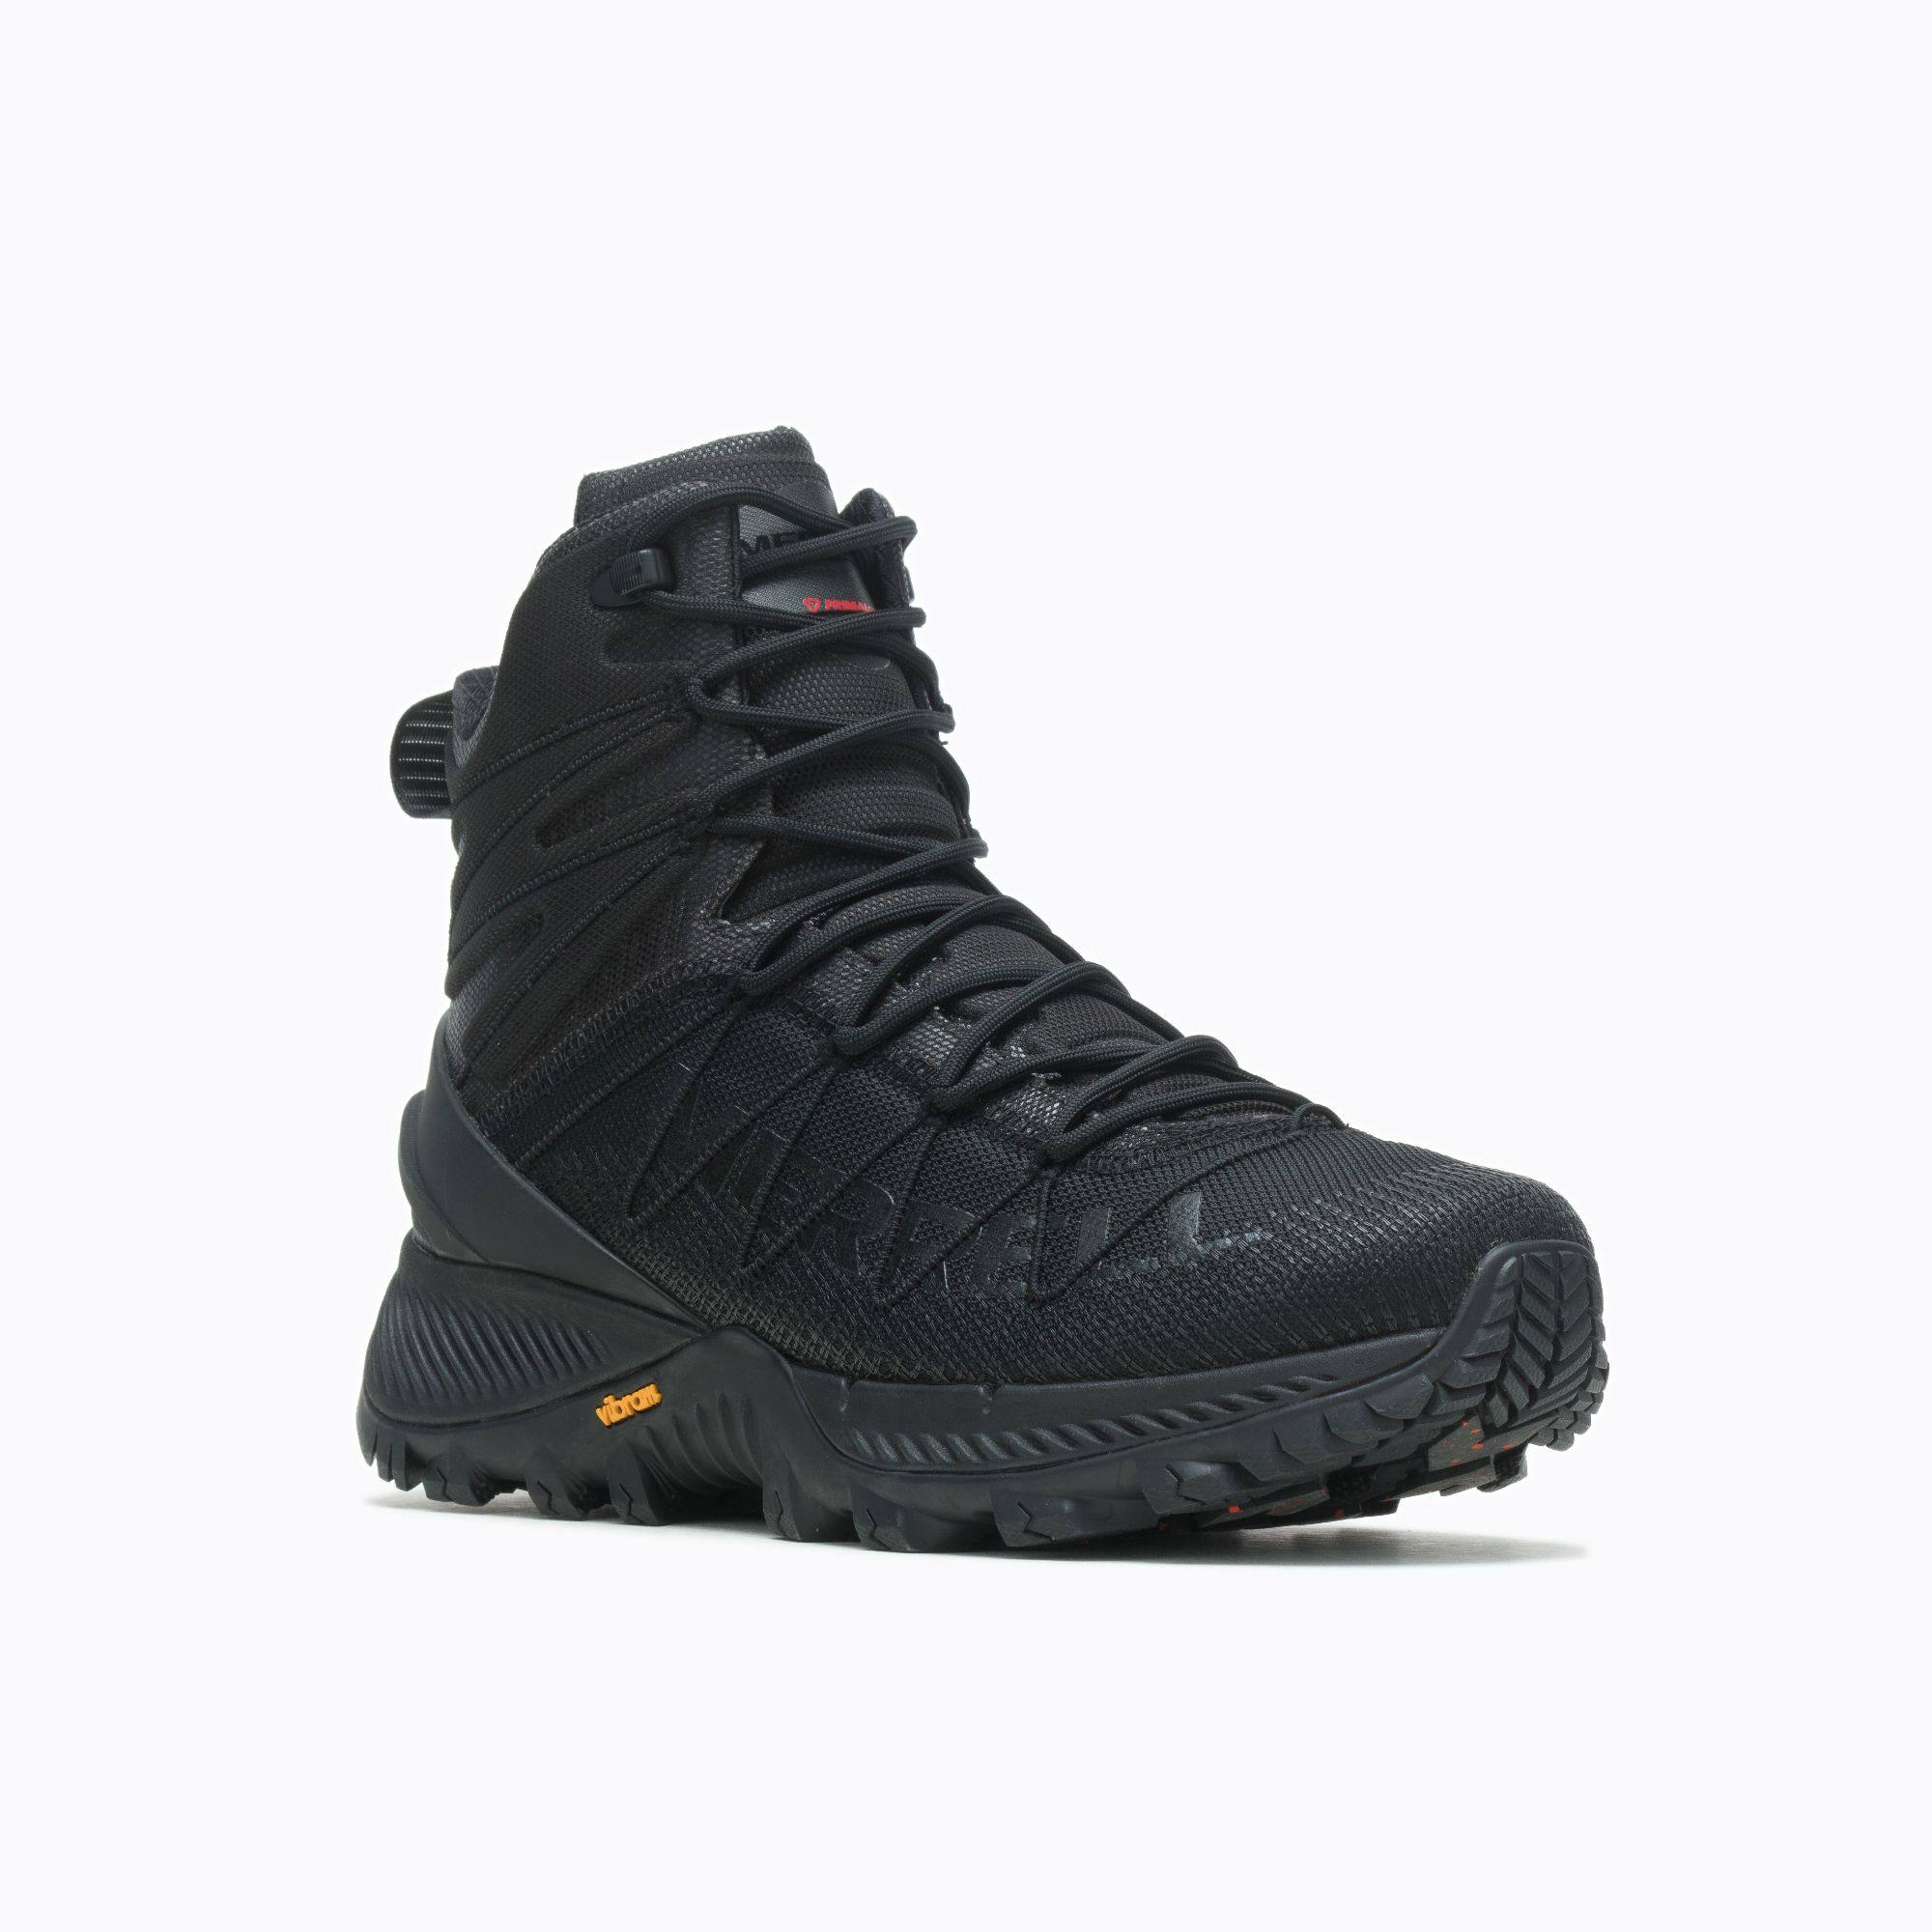 Merrell Thermo Rogue 3 Mid GTX